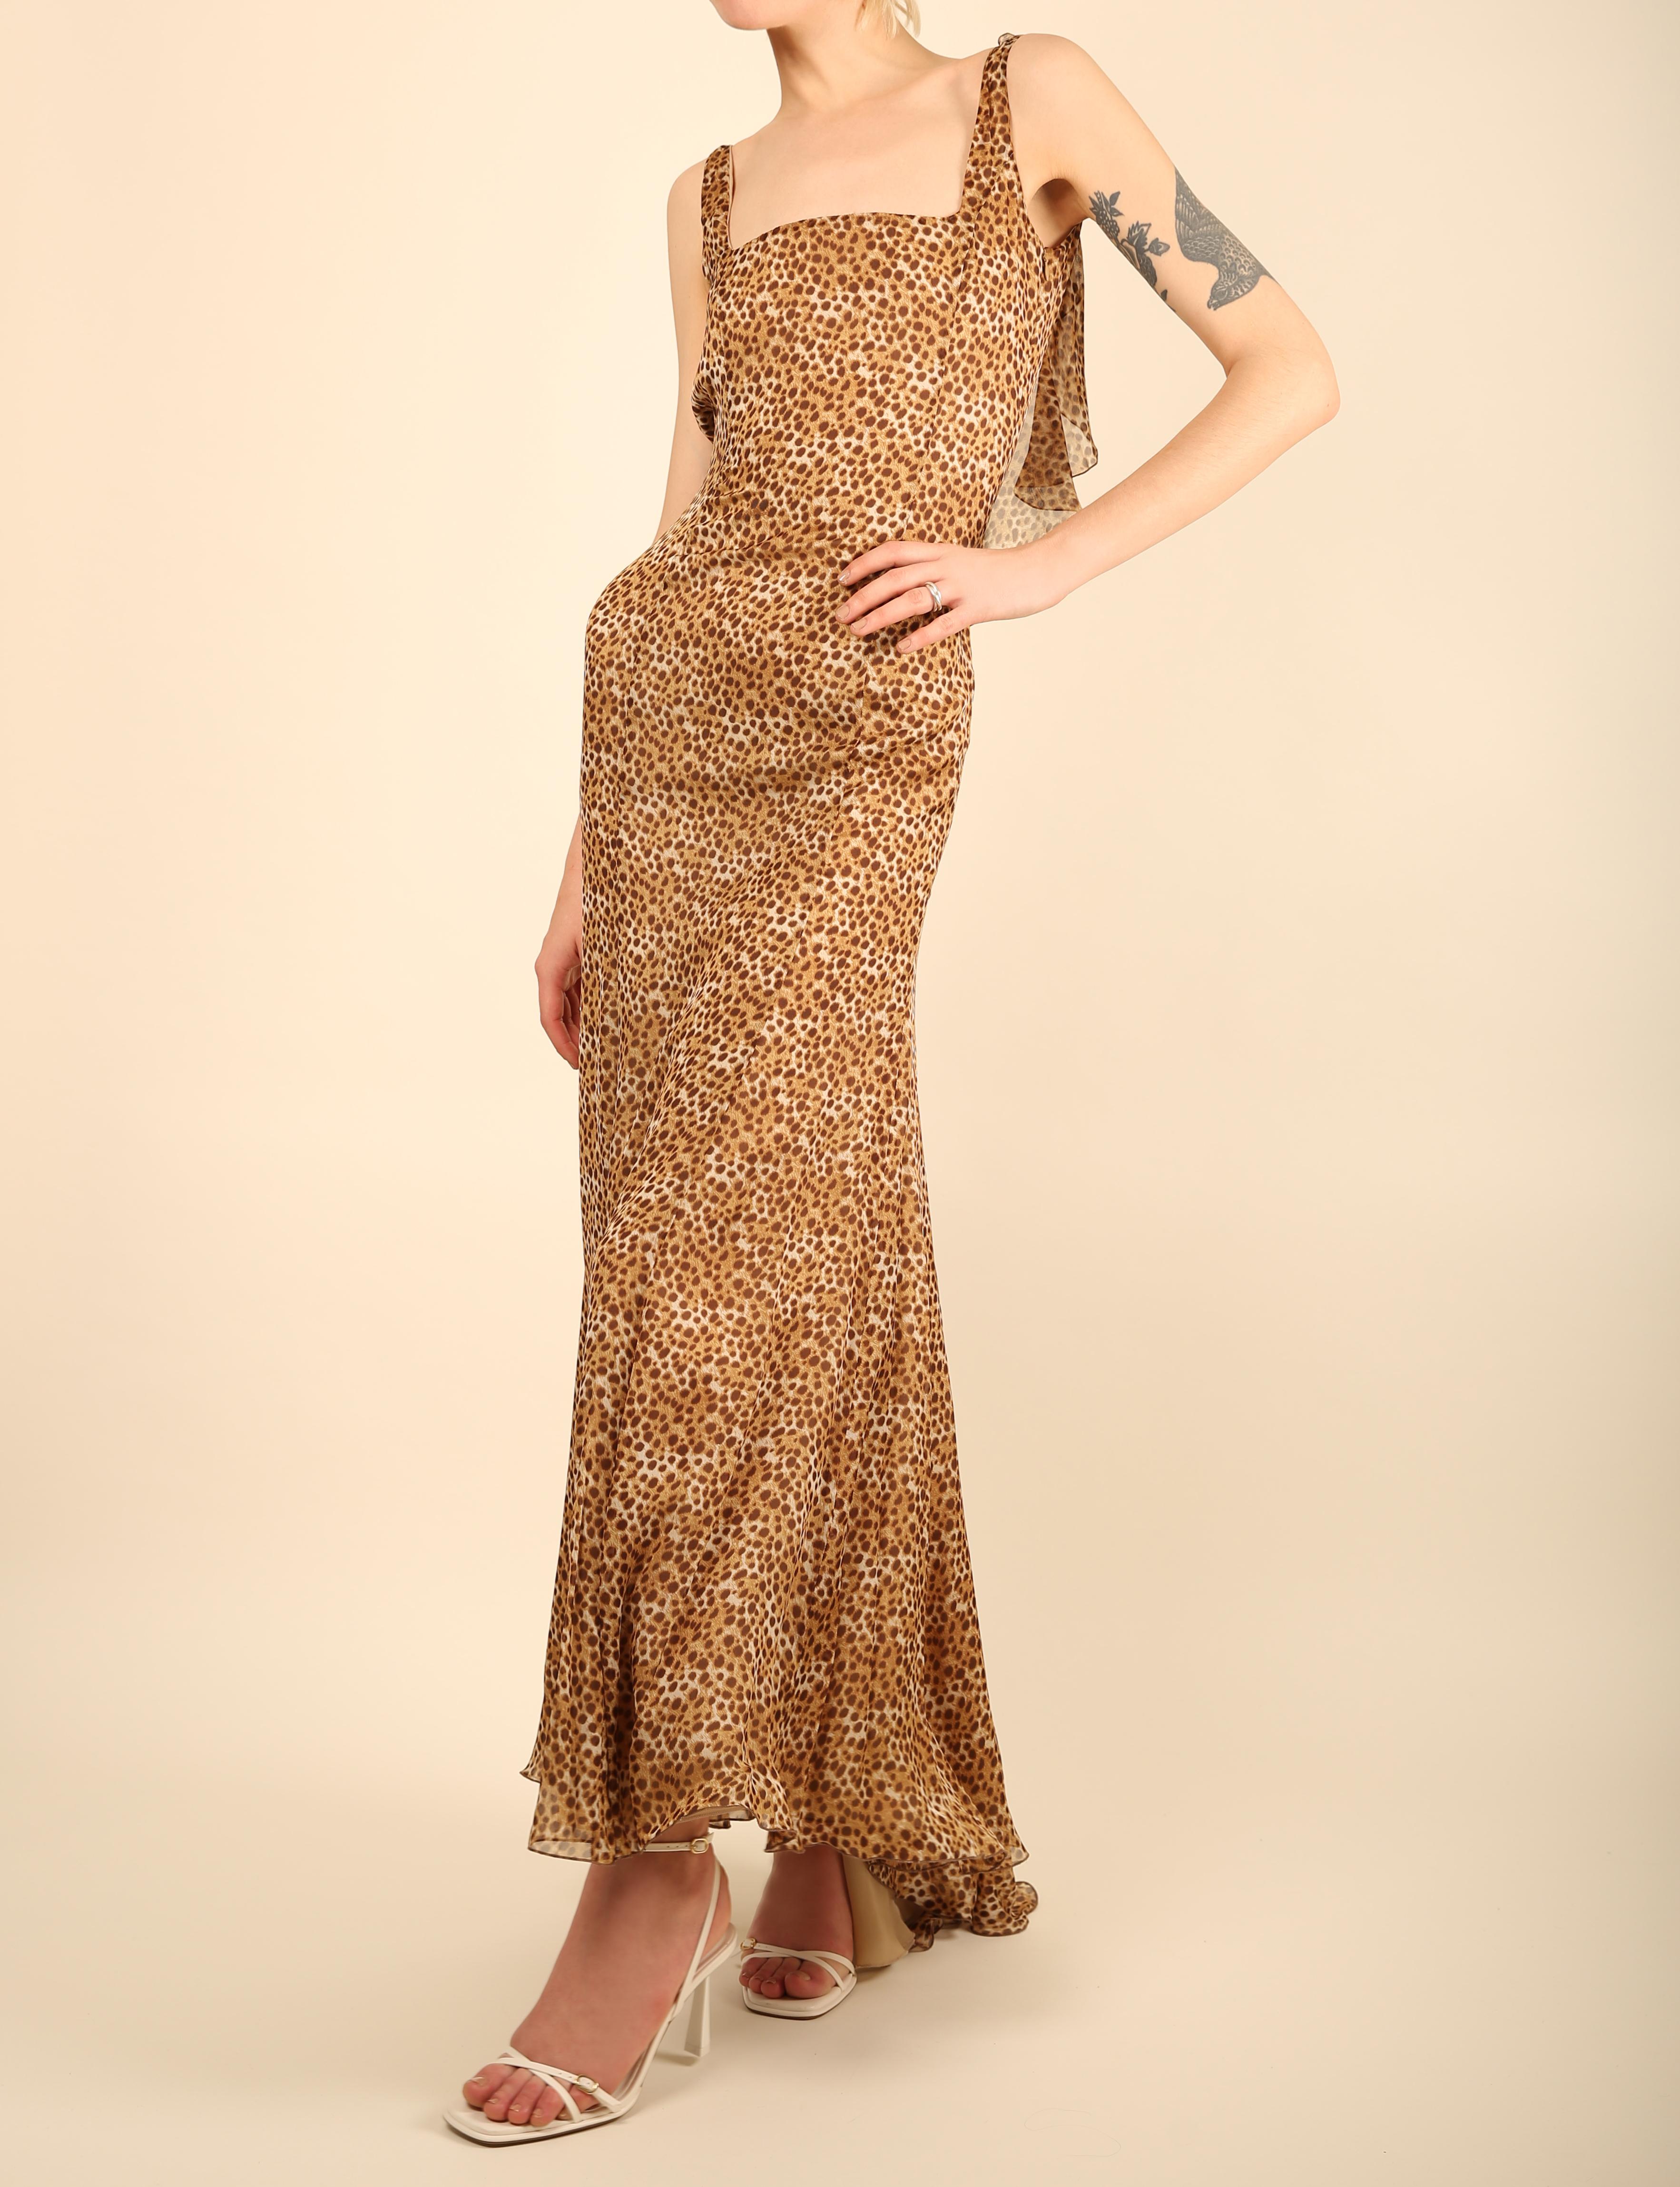 Valentino circa 1990
Floor length leopard print gown - Please note are model is extremely tall, so this would fall longer on someone else creating much more of a train at the back - please refer to the measurements below
Sleeveless dress which has